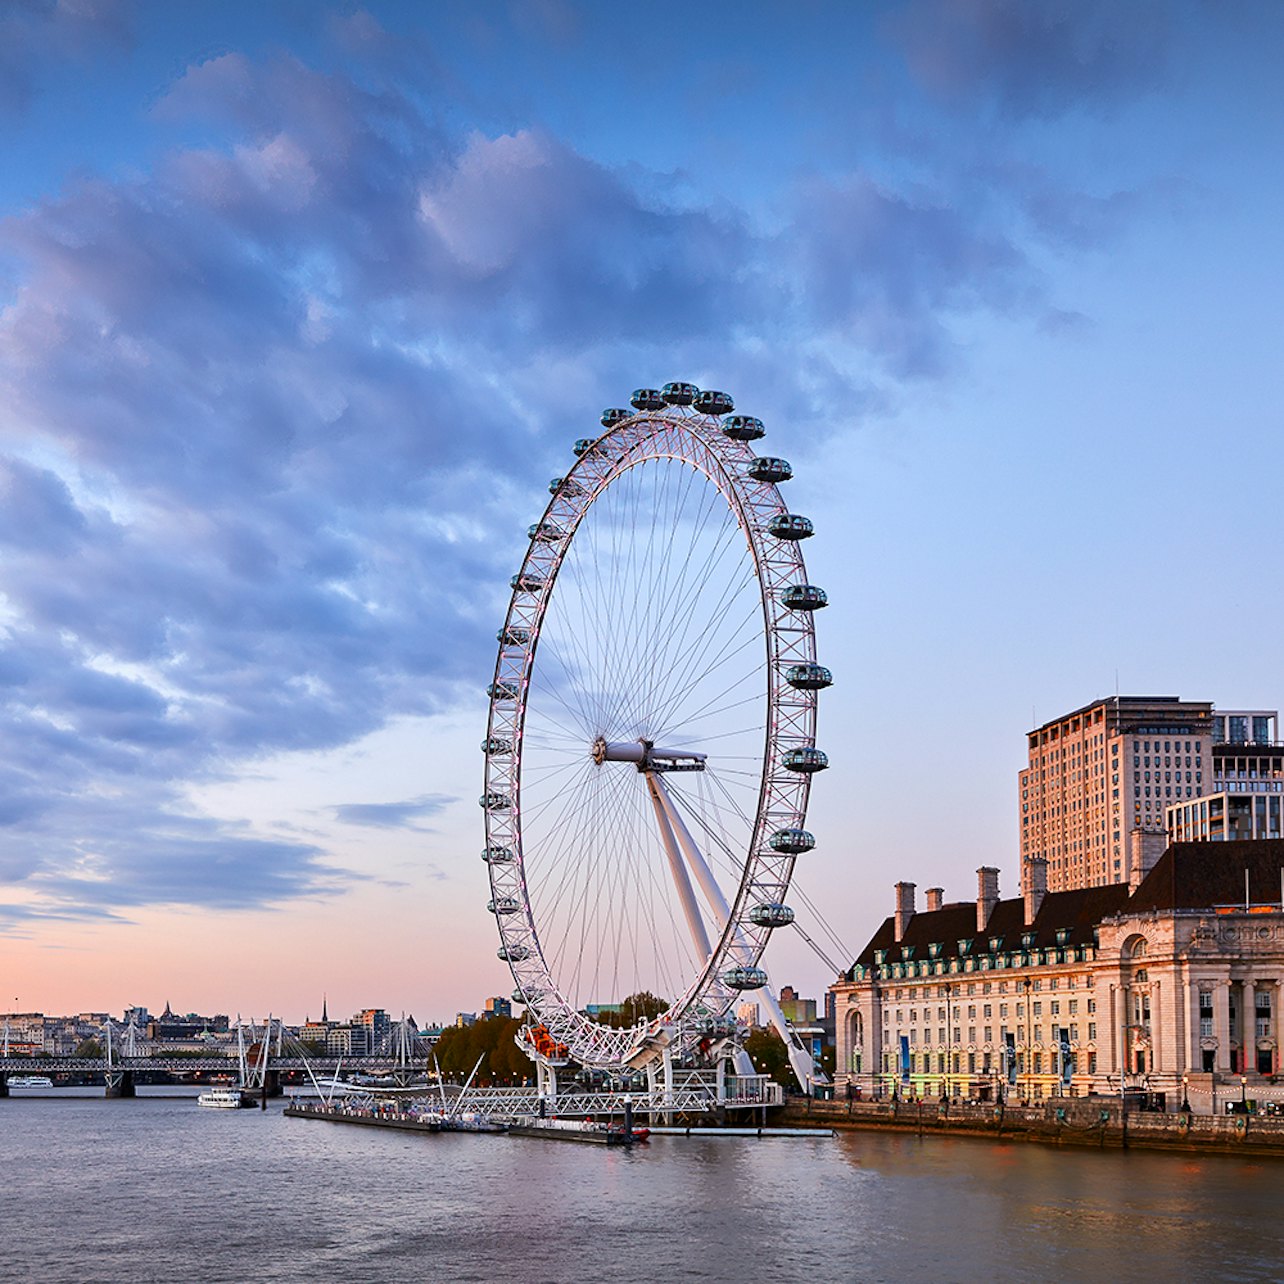 Lastminute.com London Eye: Fast Track - Accommodations in London